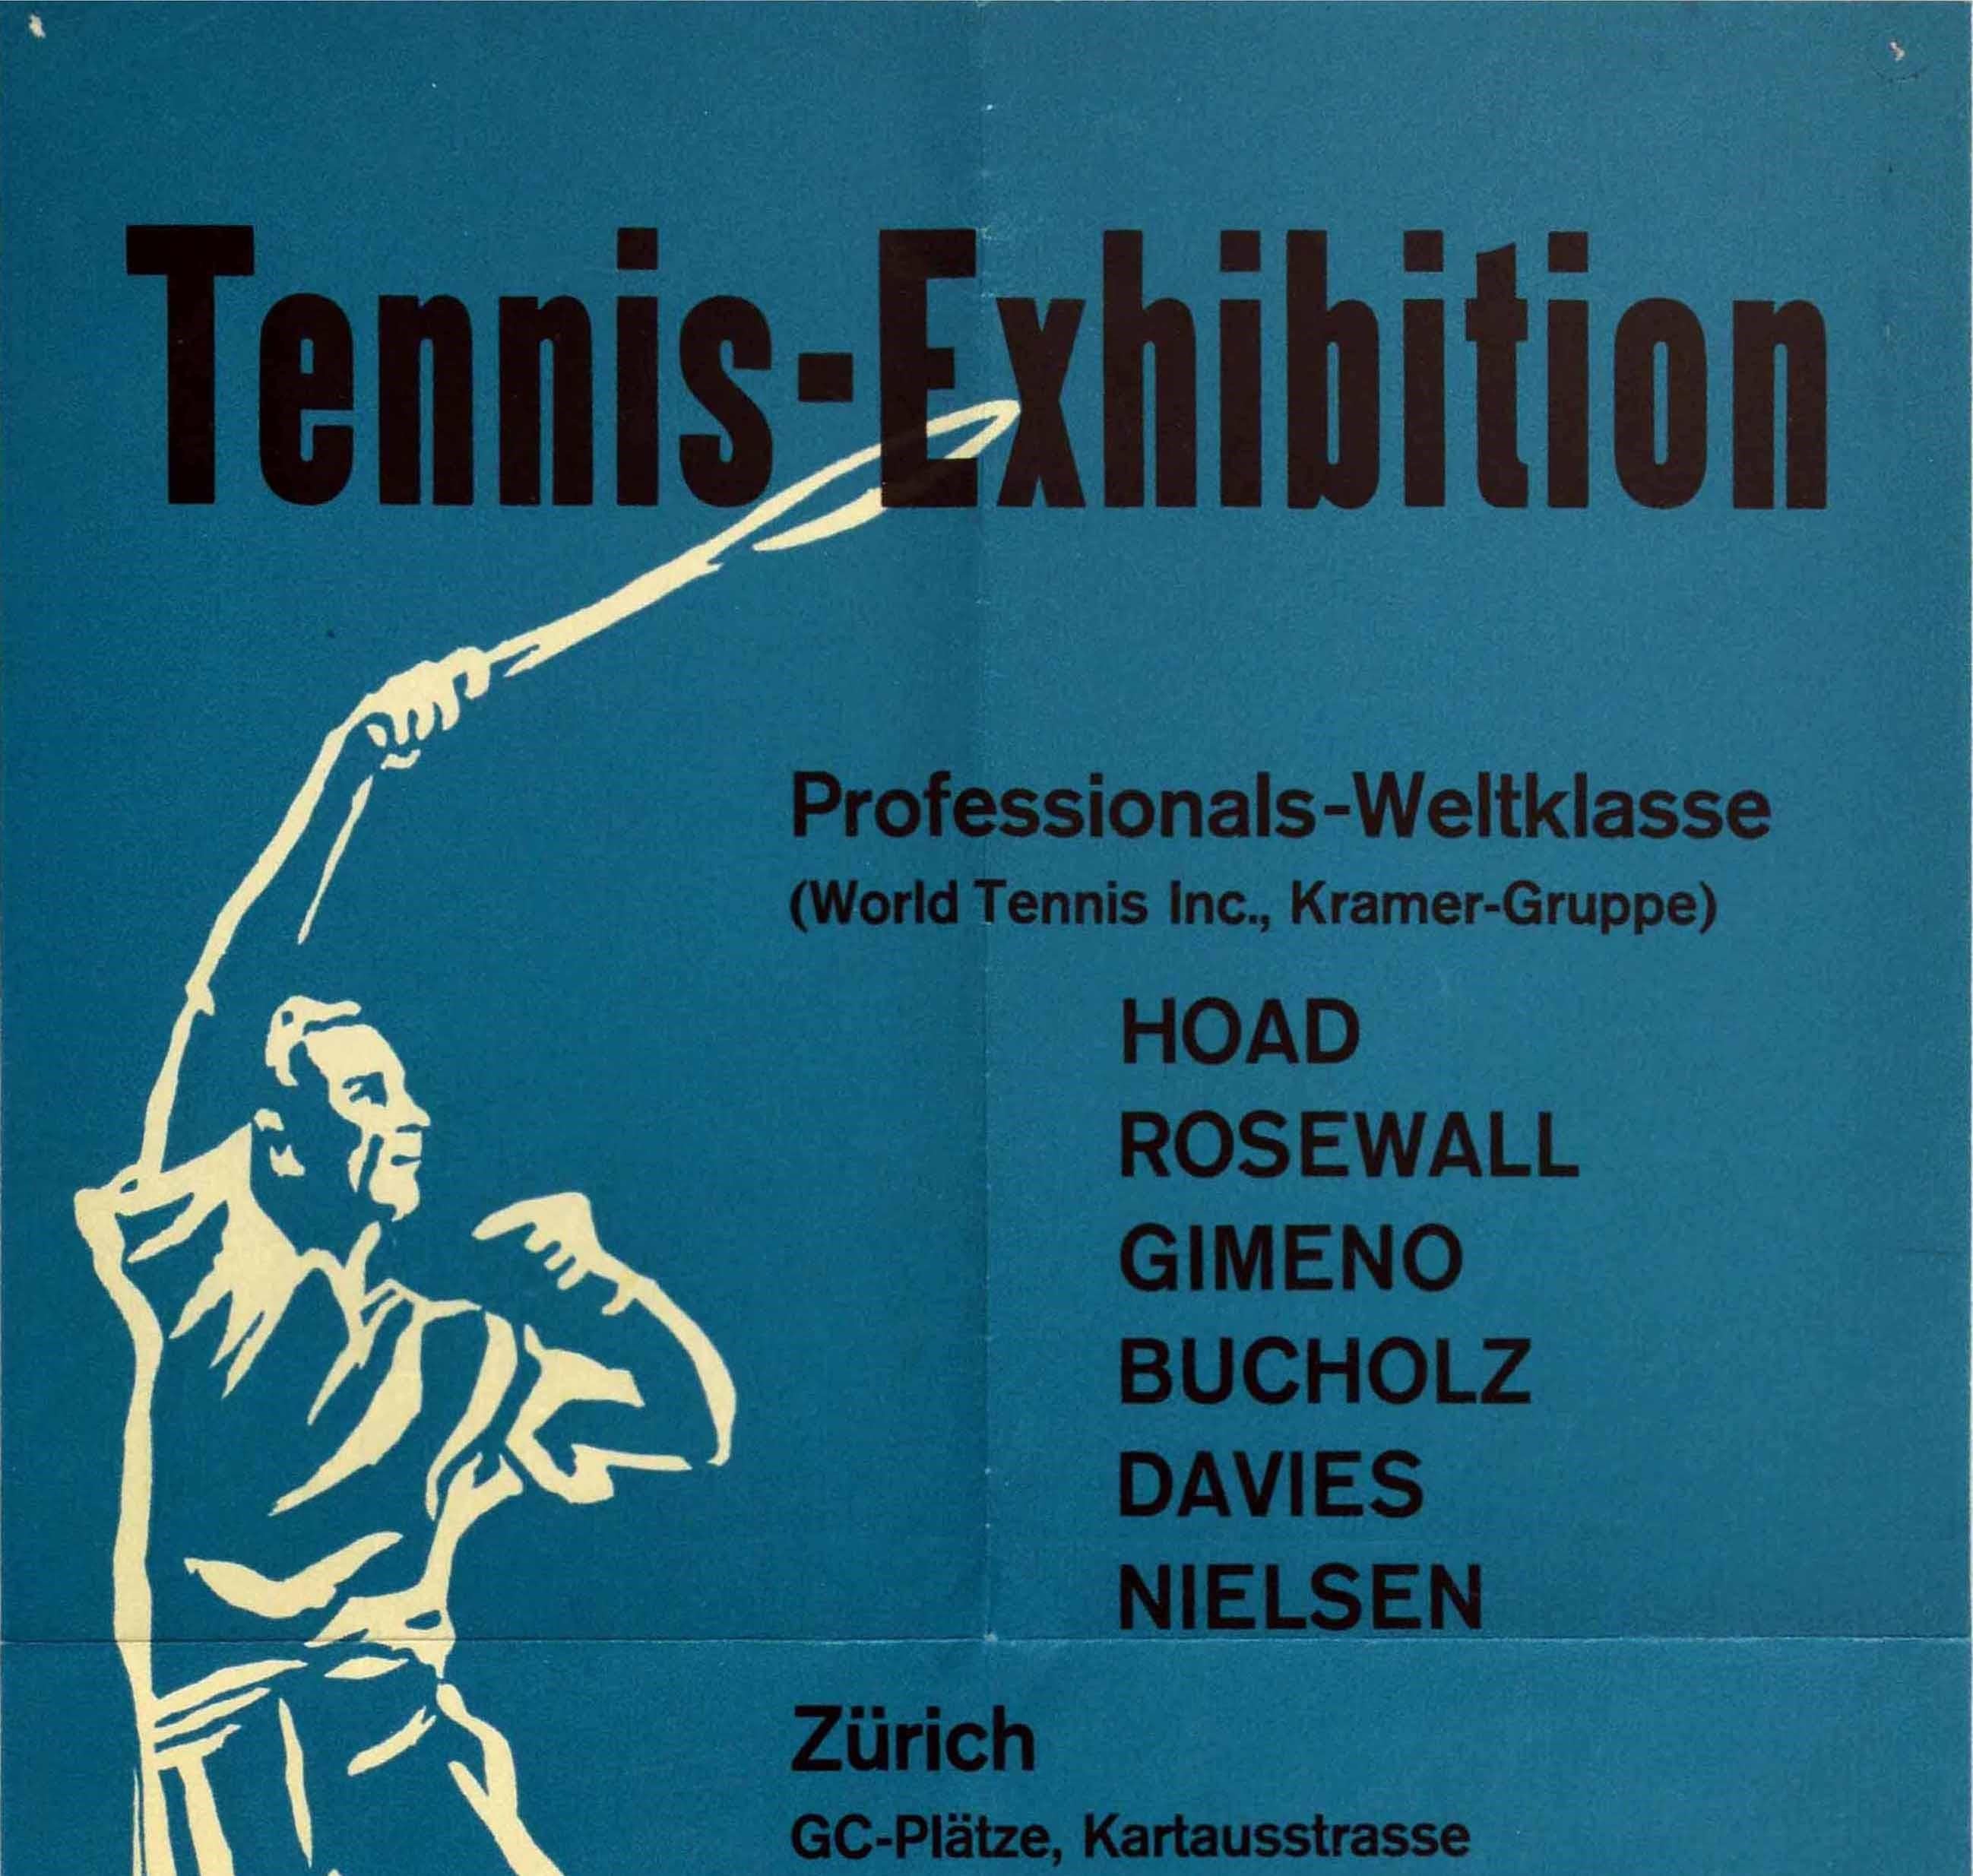 Original vintage sport poster advertising the Tennis Exhibition Professionals World Class (World Tennis Inc Kramer Gruppe) - Hoad / Rosewall / Gimeno / Bucholz / Davies / Nielsen - organised by the Grasshopper Club Tennis Section and held on 17